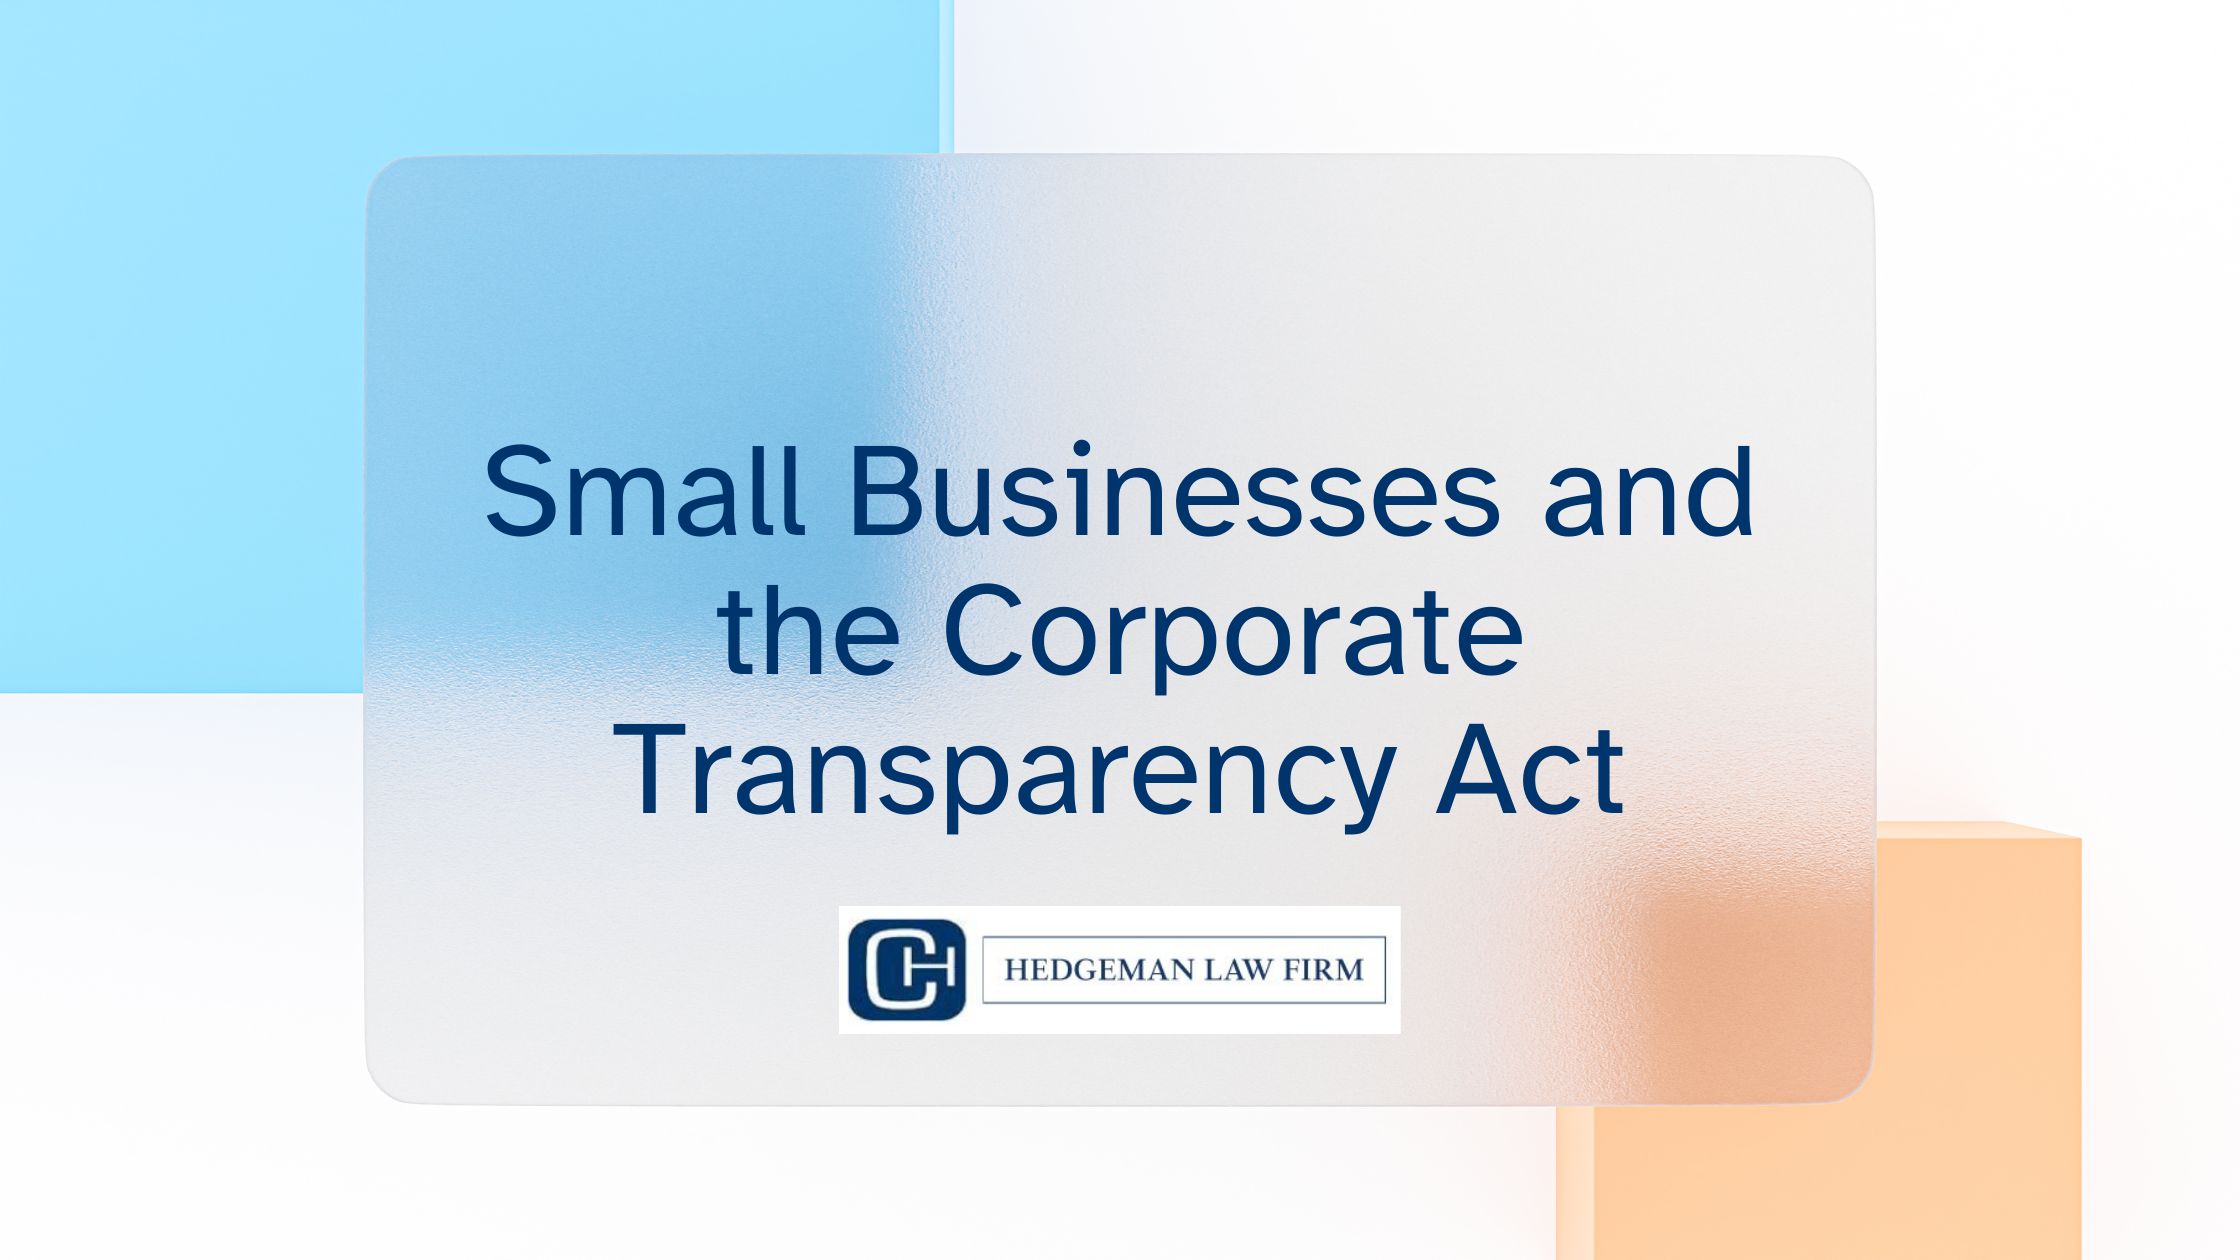 the Corporate Transparency Act